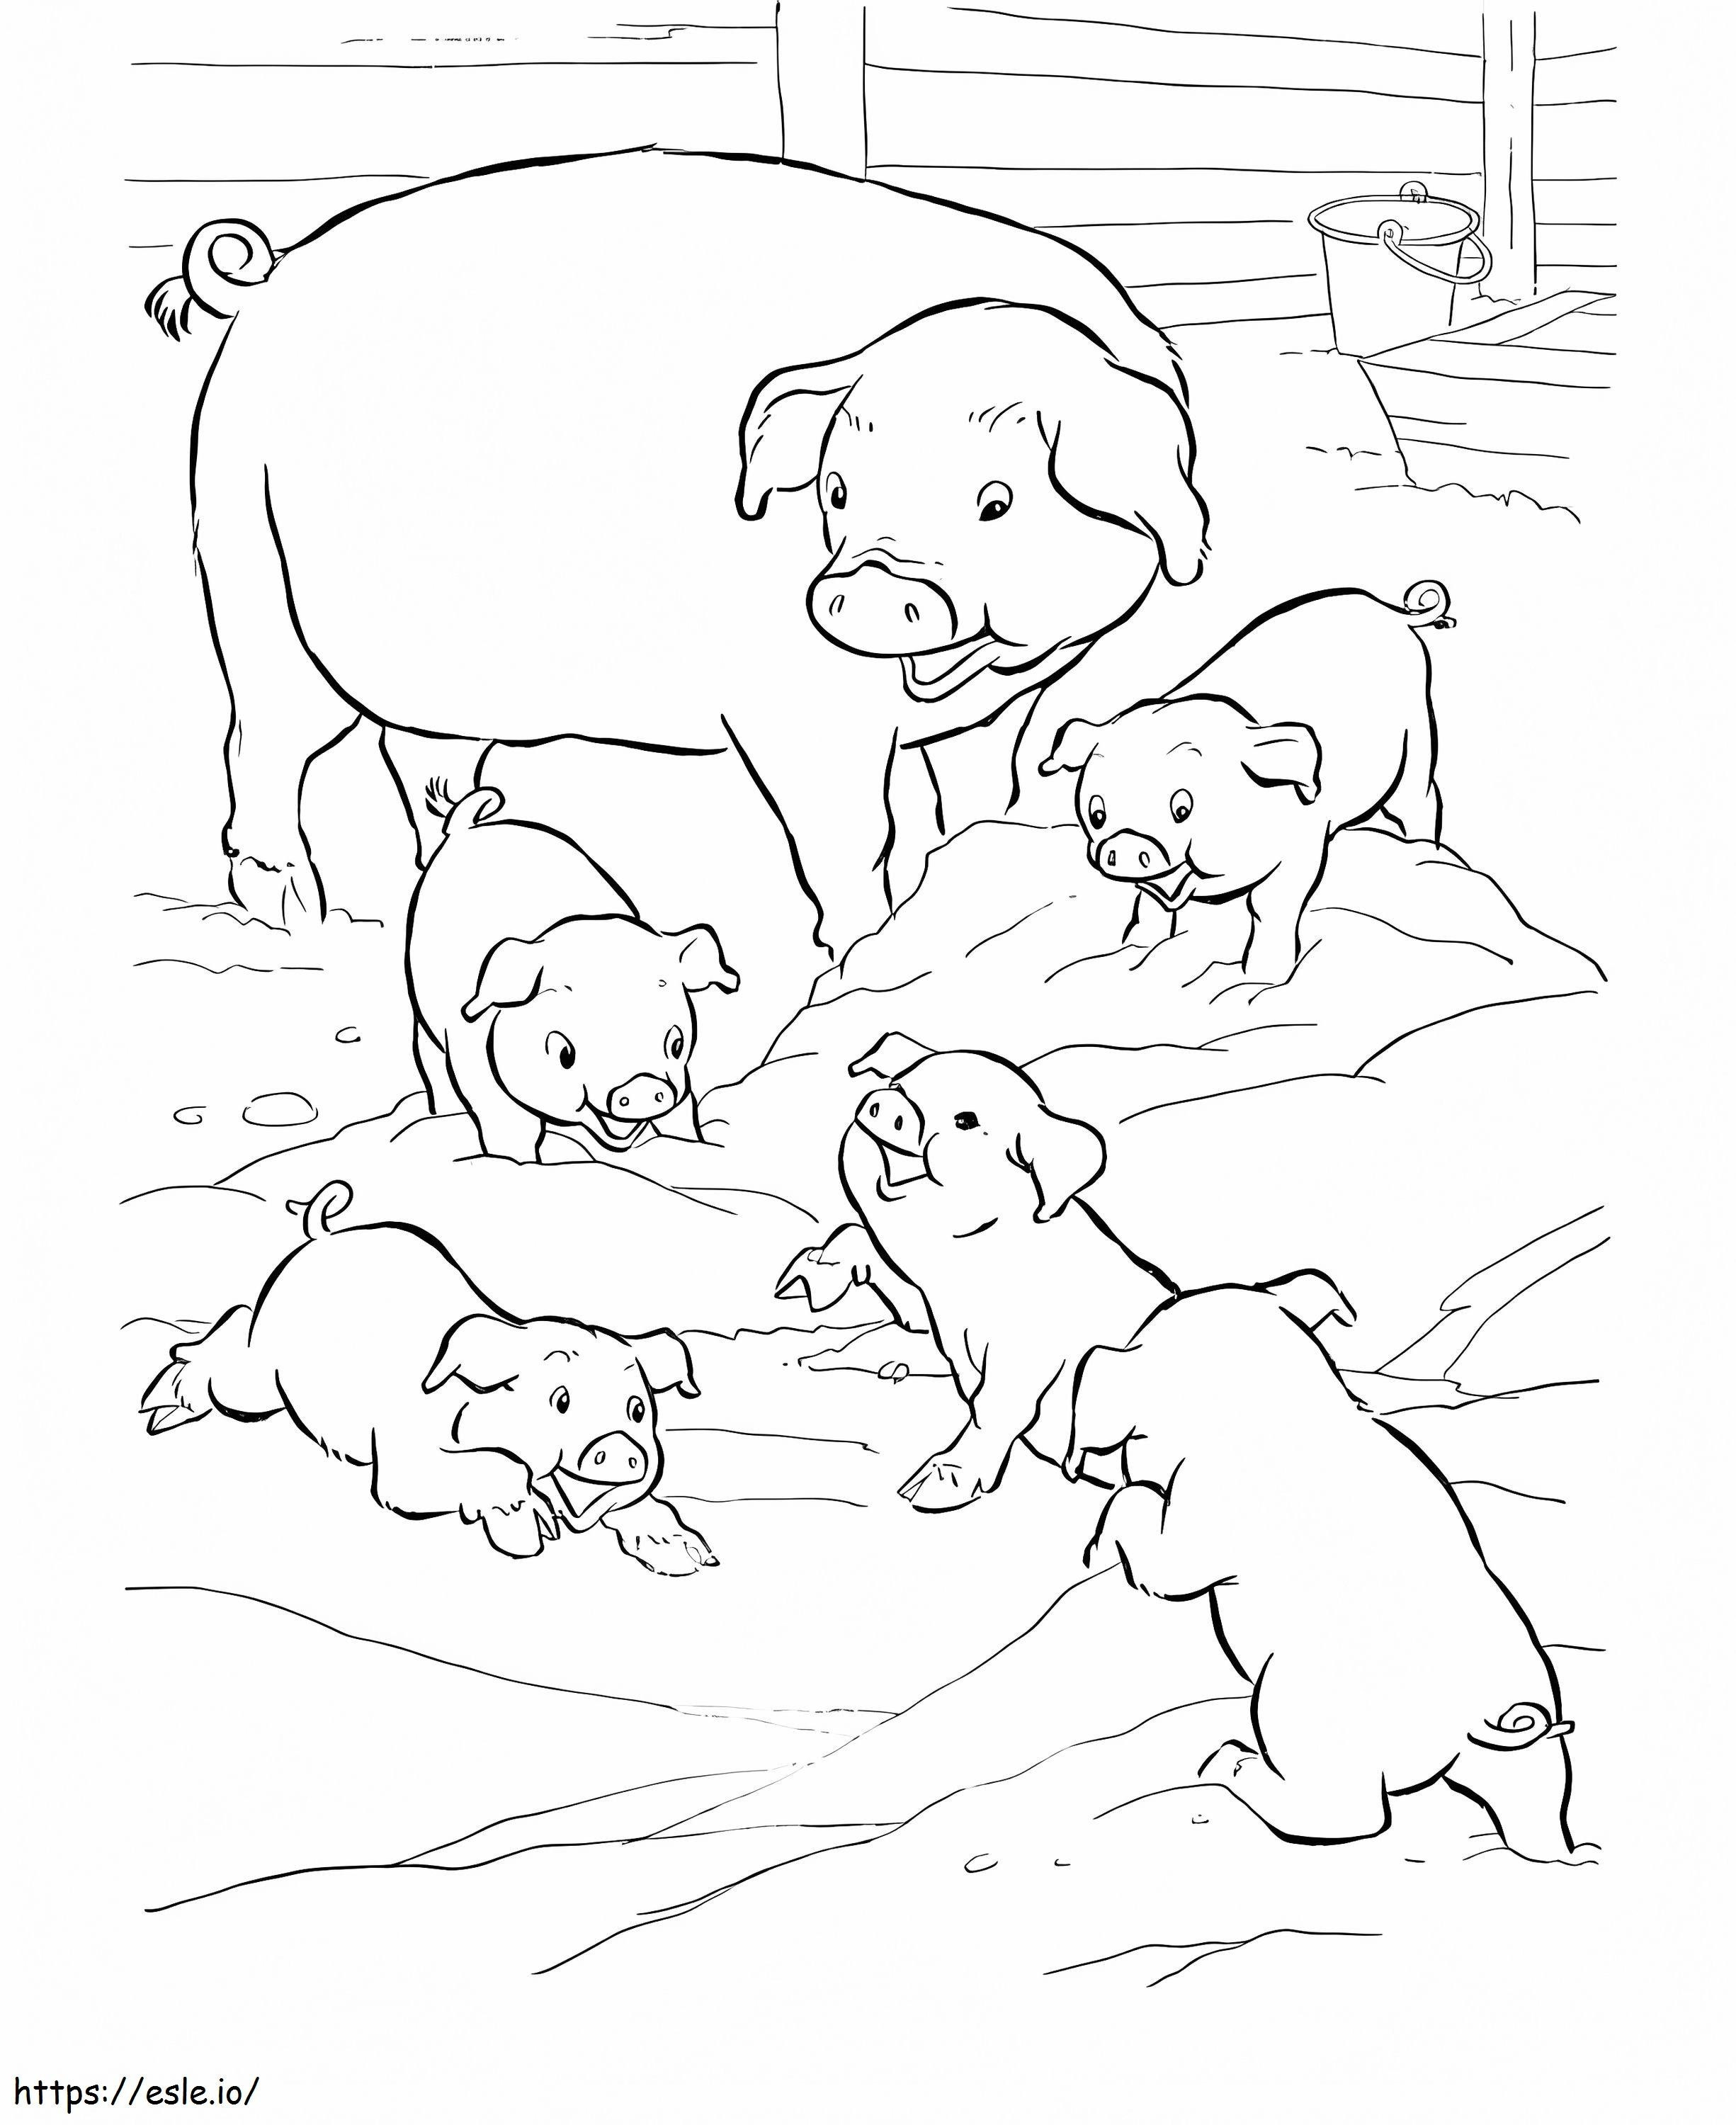 Family Pigs coloring page